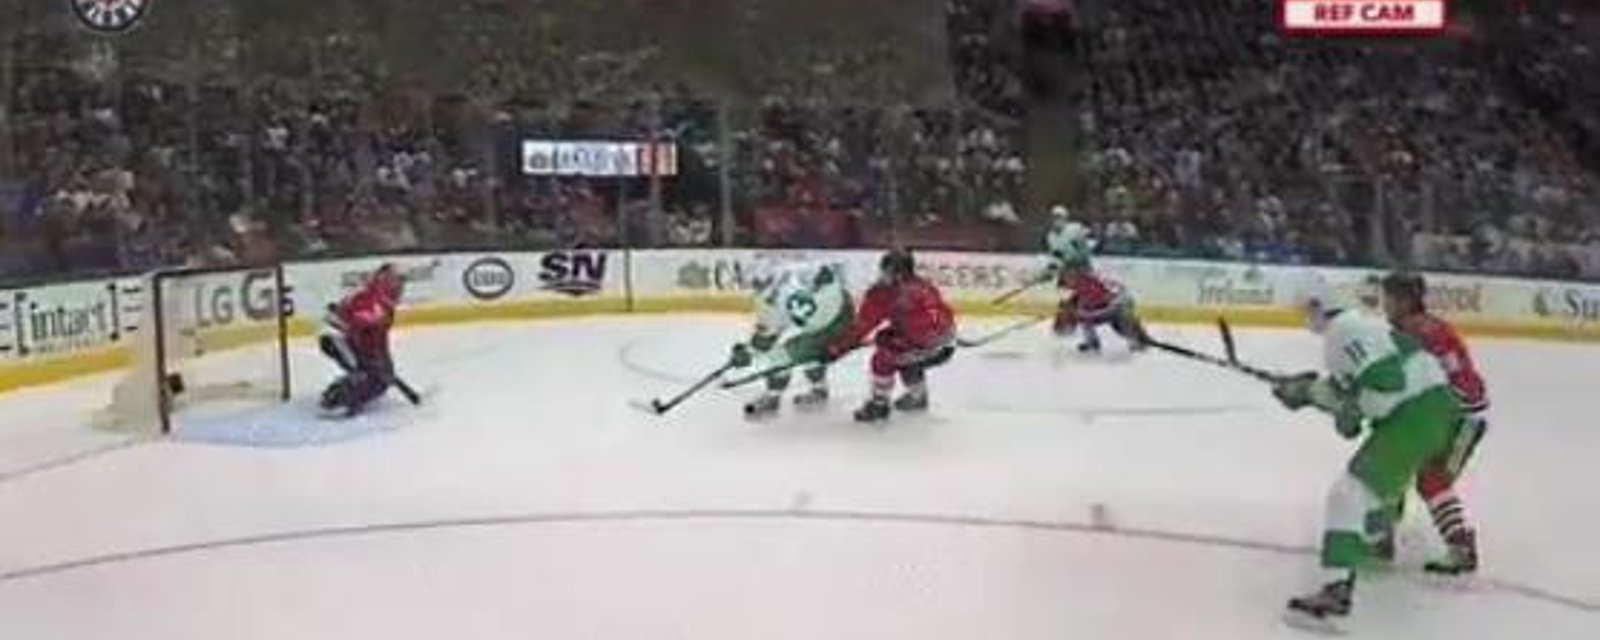 See the Matthews goal from an amazing angle! 